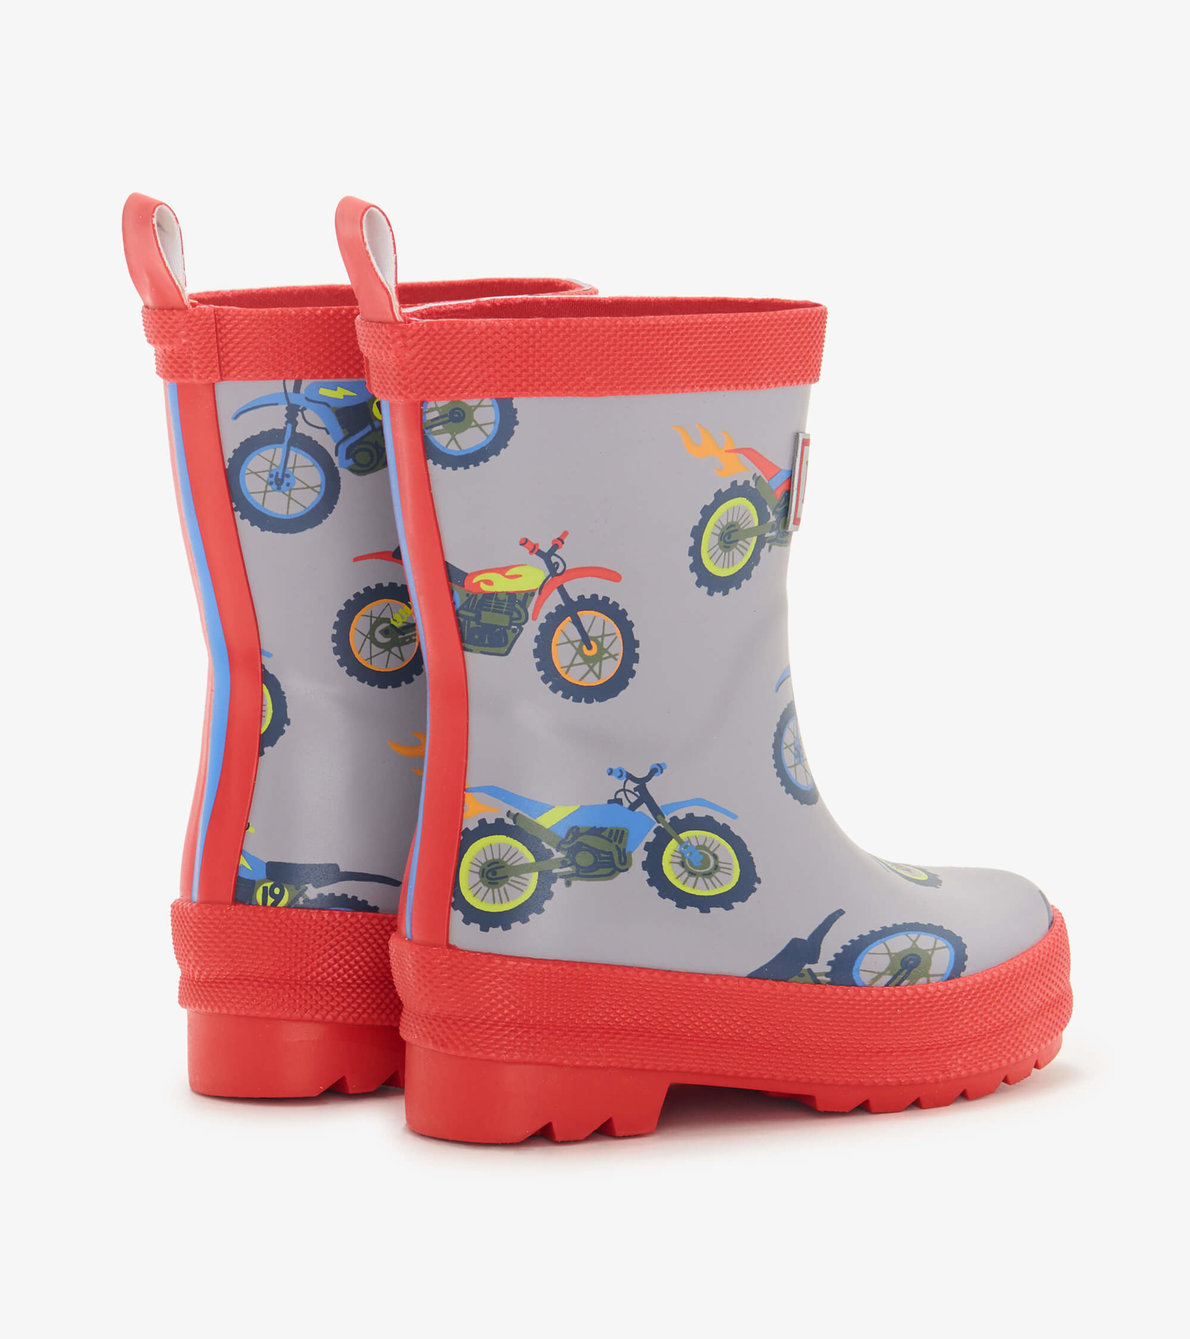 View larger image of My 1st Rain Boots - Blazing Dirt Bikes